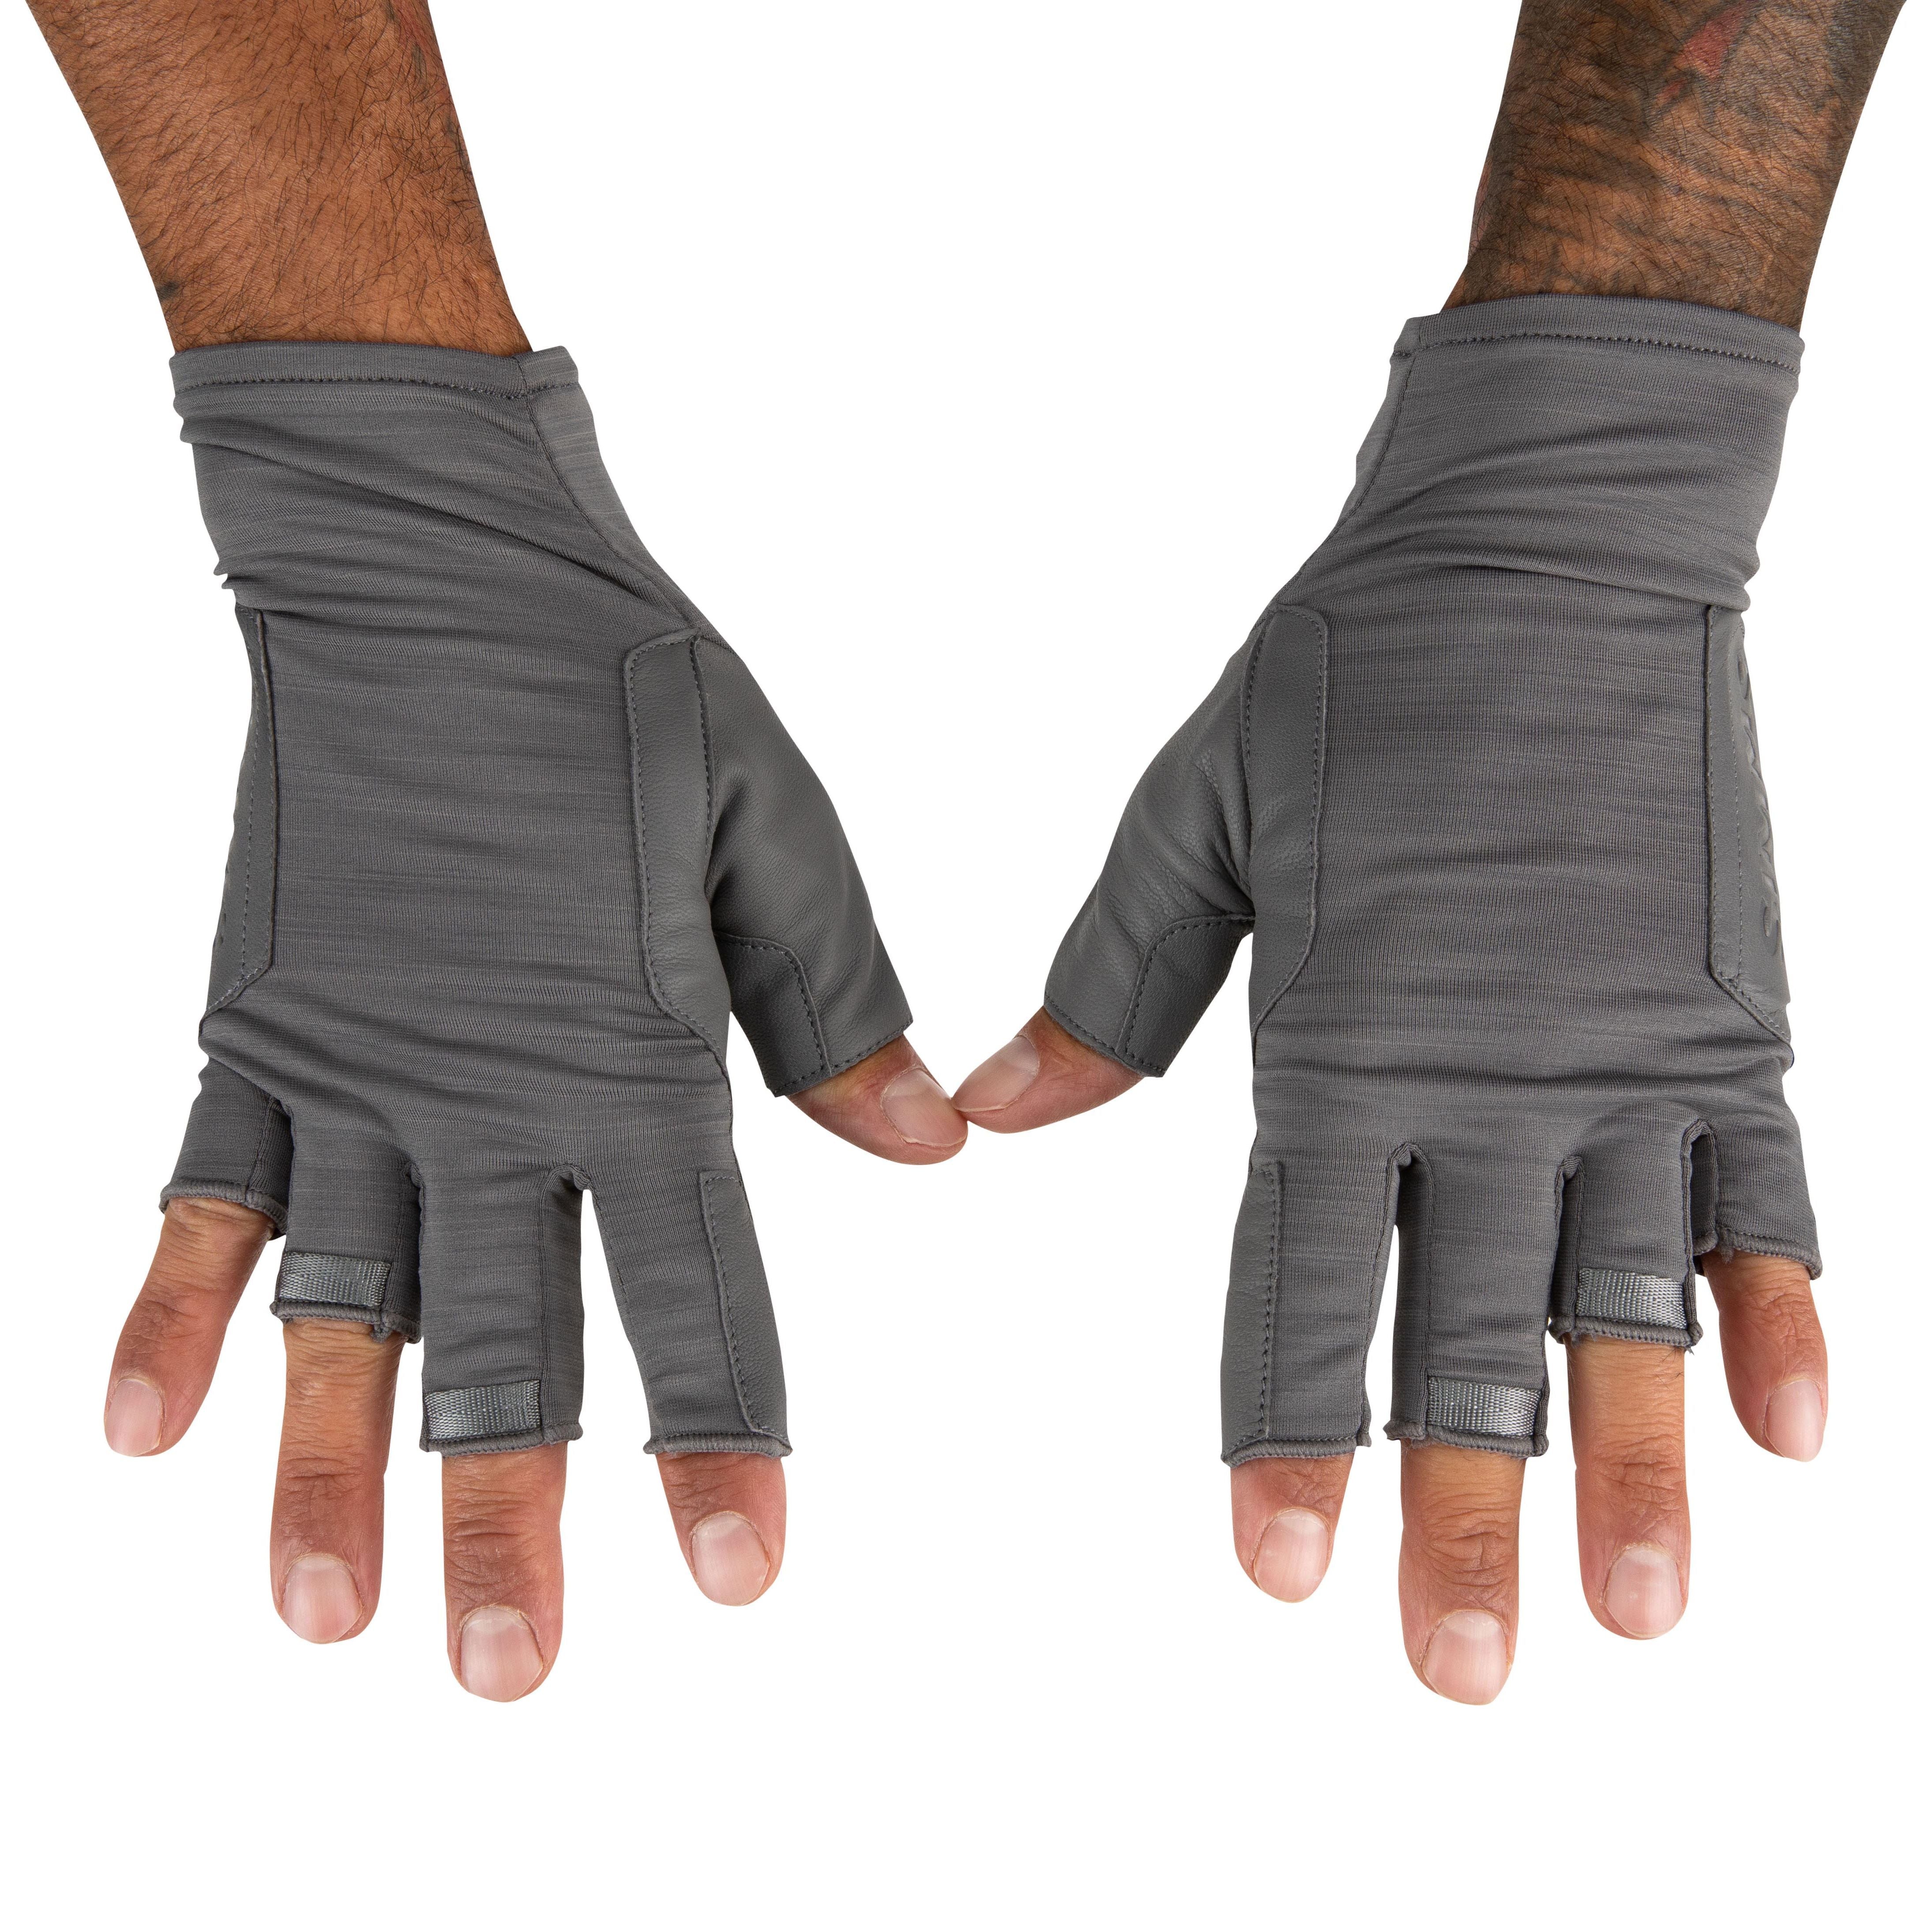 Simms SolarFlex Guide Glove Sterling Image 1